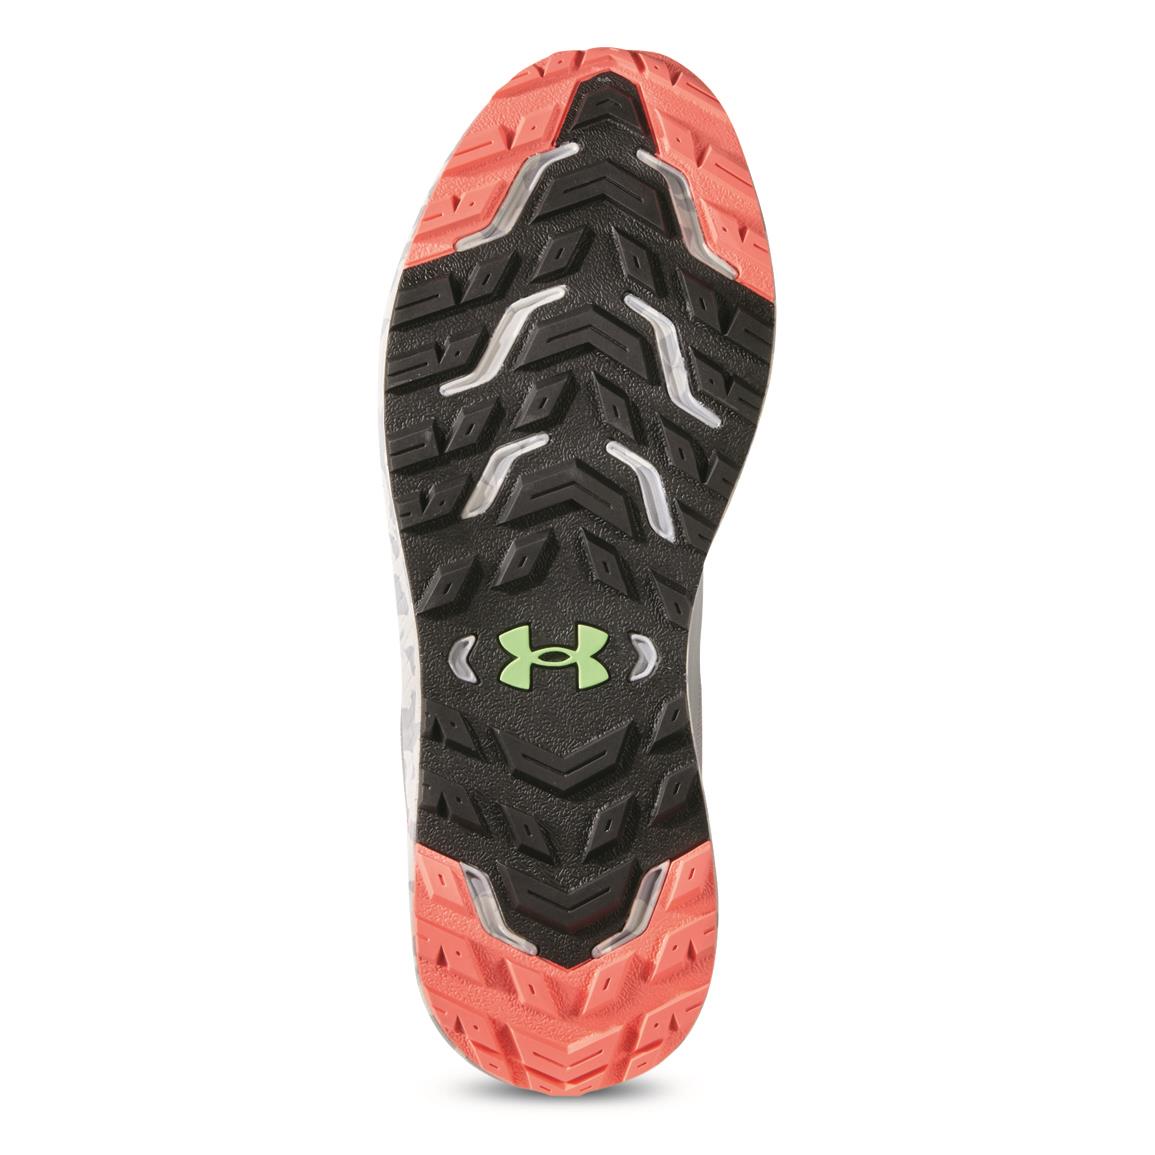 Under Armour Trail Shoes | Sportsman's Guide